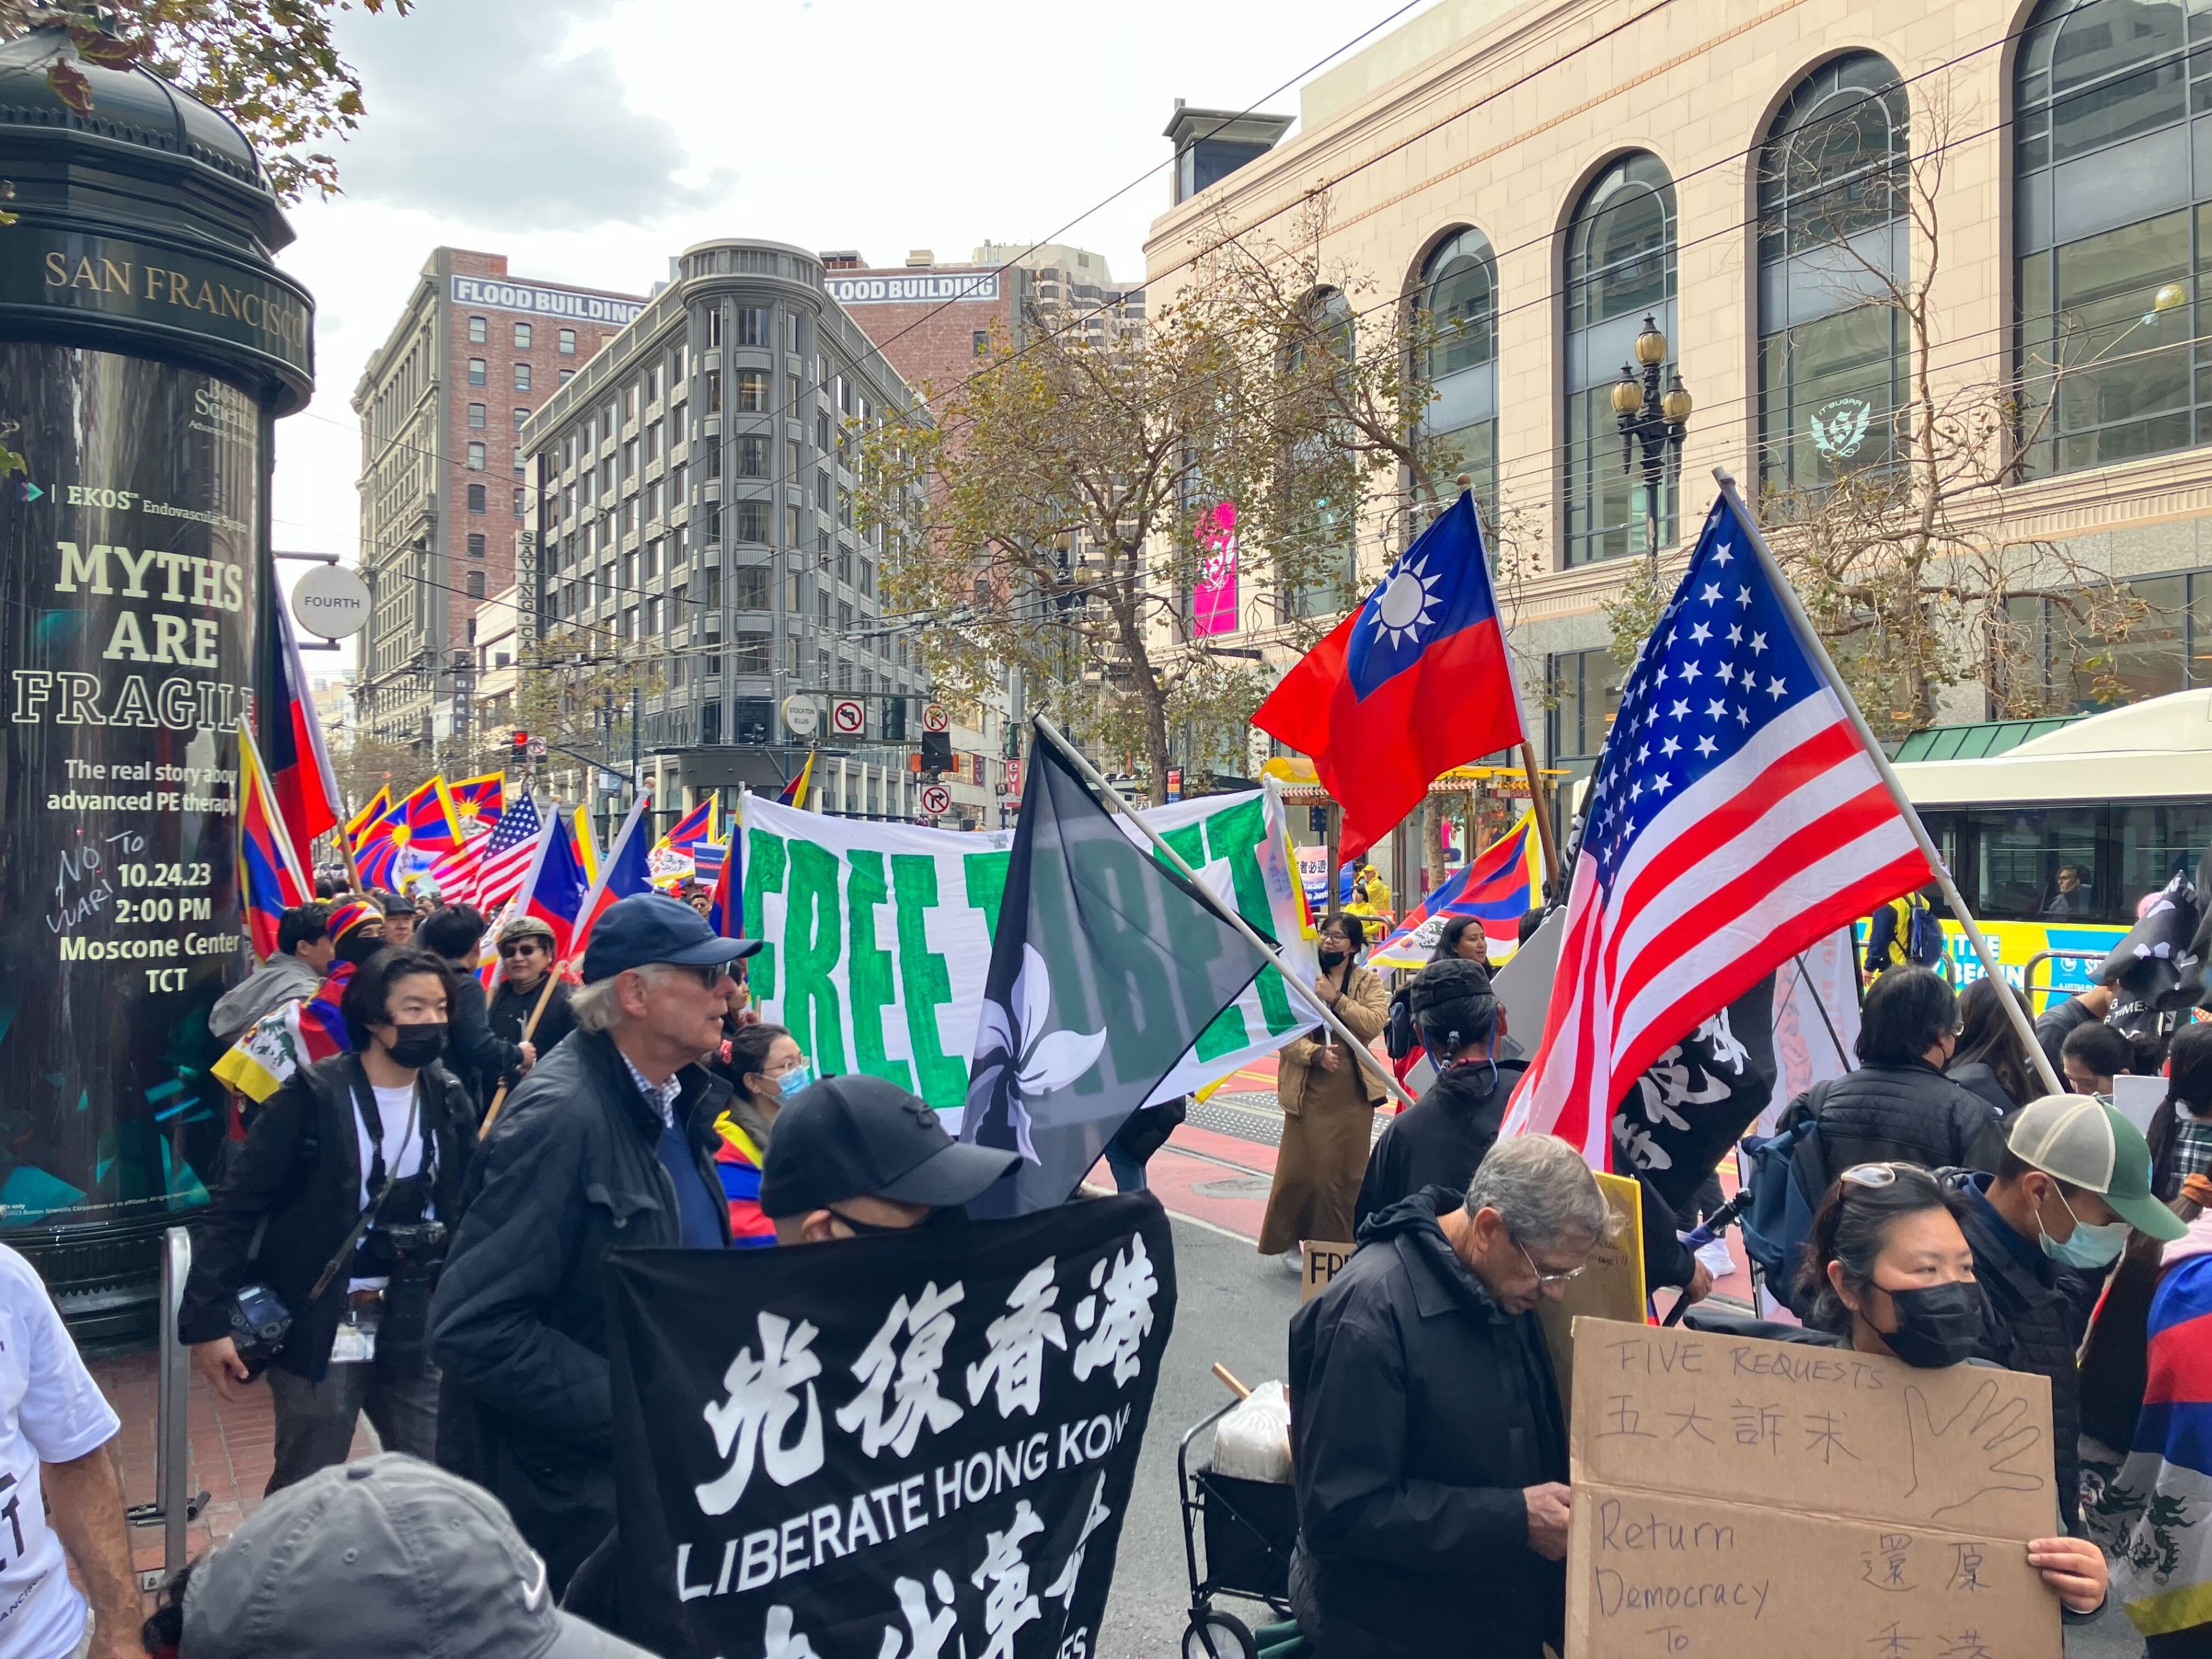 Protesters wave U.S. and Hong Kong flags and carry banners saying &quot;Liberate Hong Kong&quot; and &quot;Free Tibet.&quot;